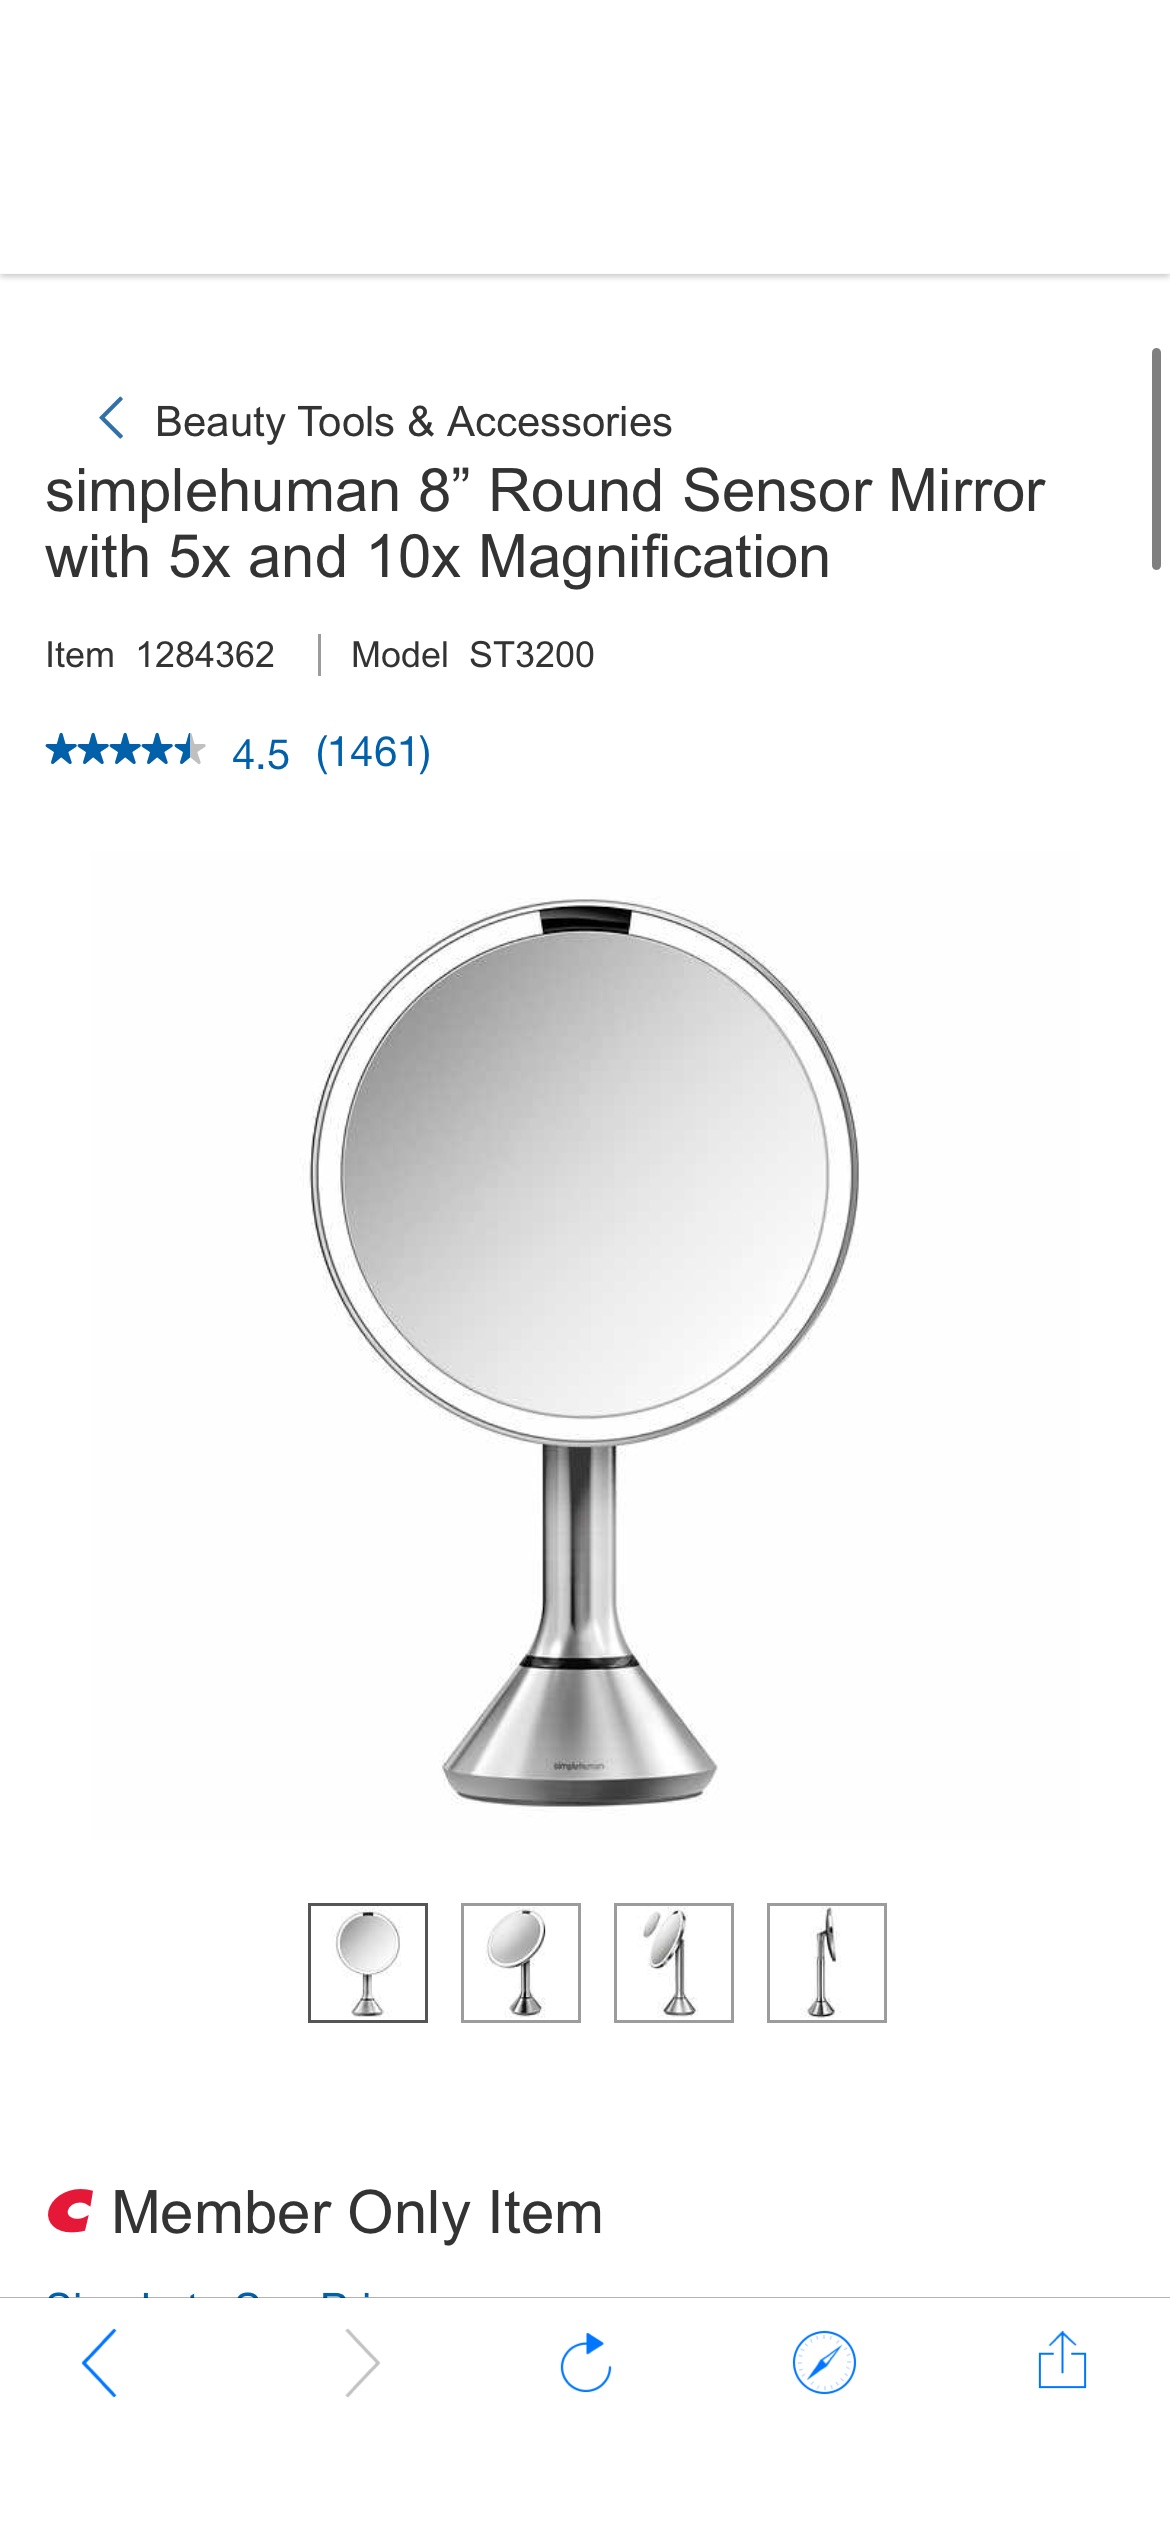 simplehuman 化妆镜 8” Round Sensor Mirror with 5x and 10x Magnification | Costco